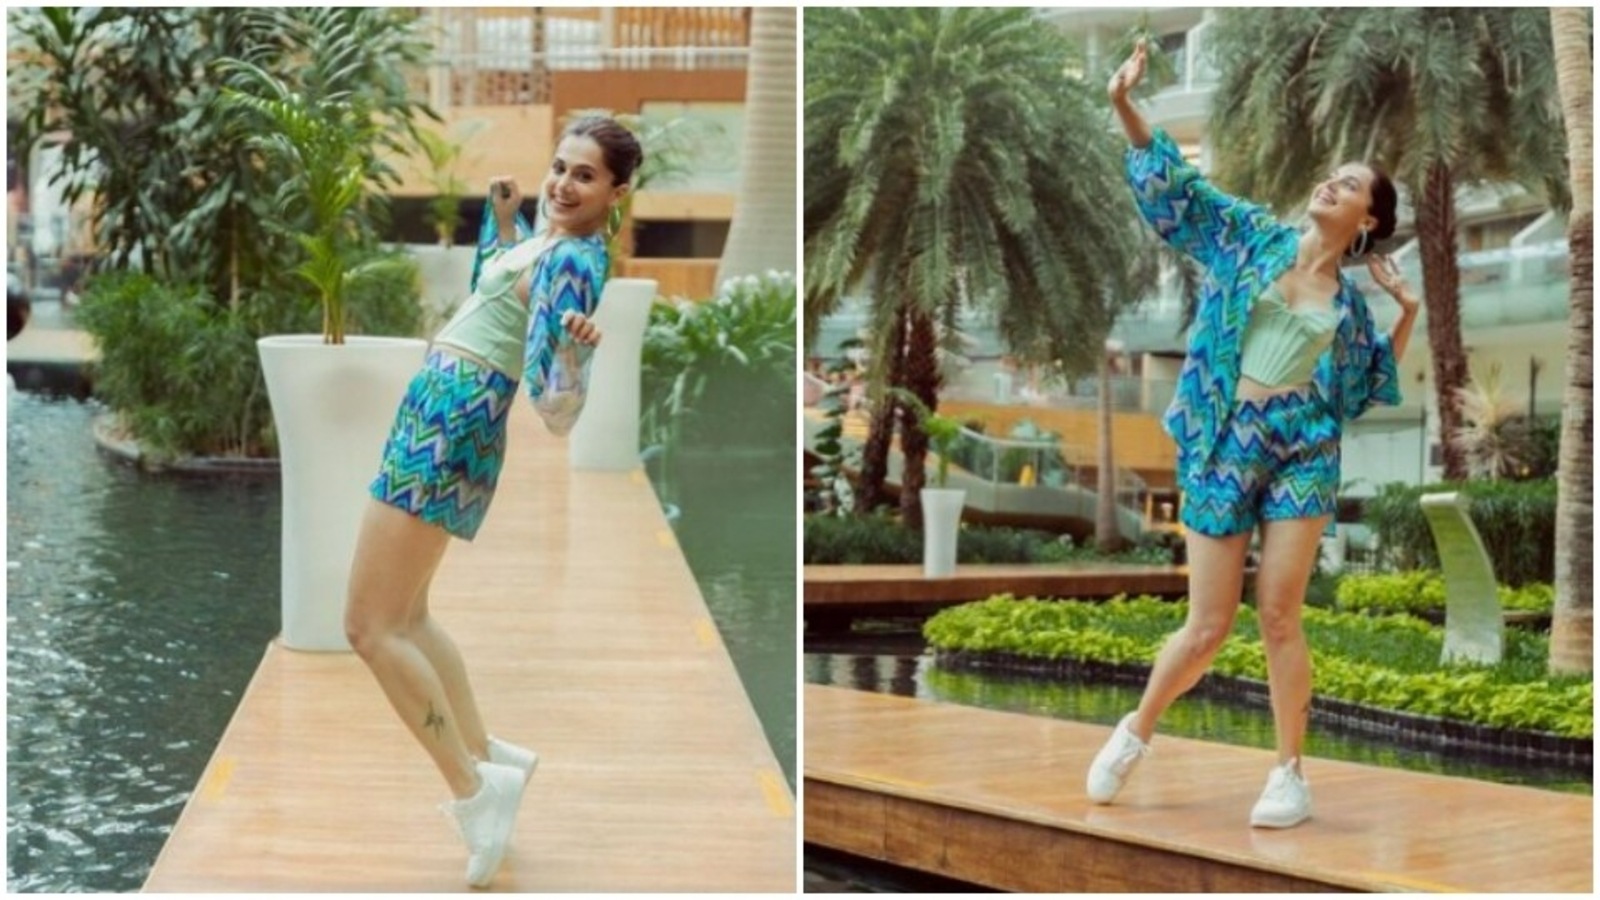 Taapsee Pannu’s blue and green co-ord set is setting the vacay vibe on Instagram